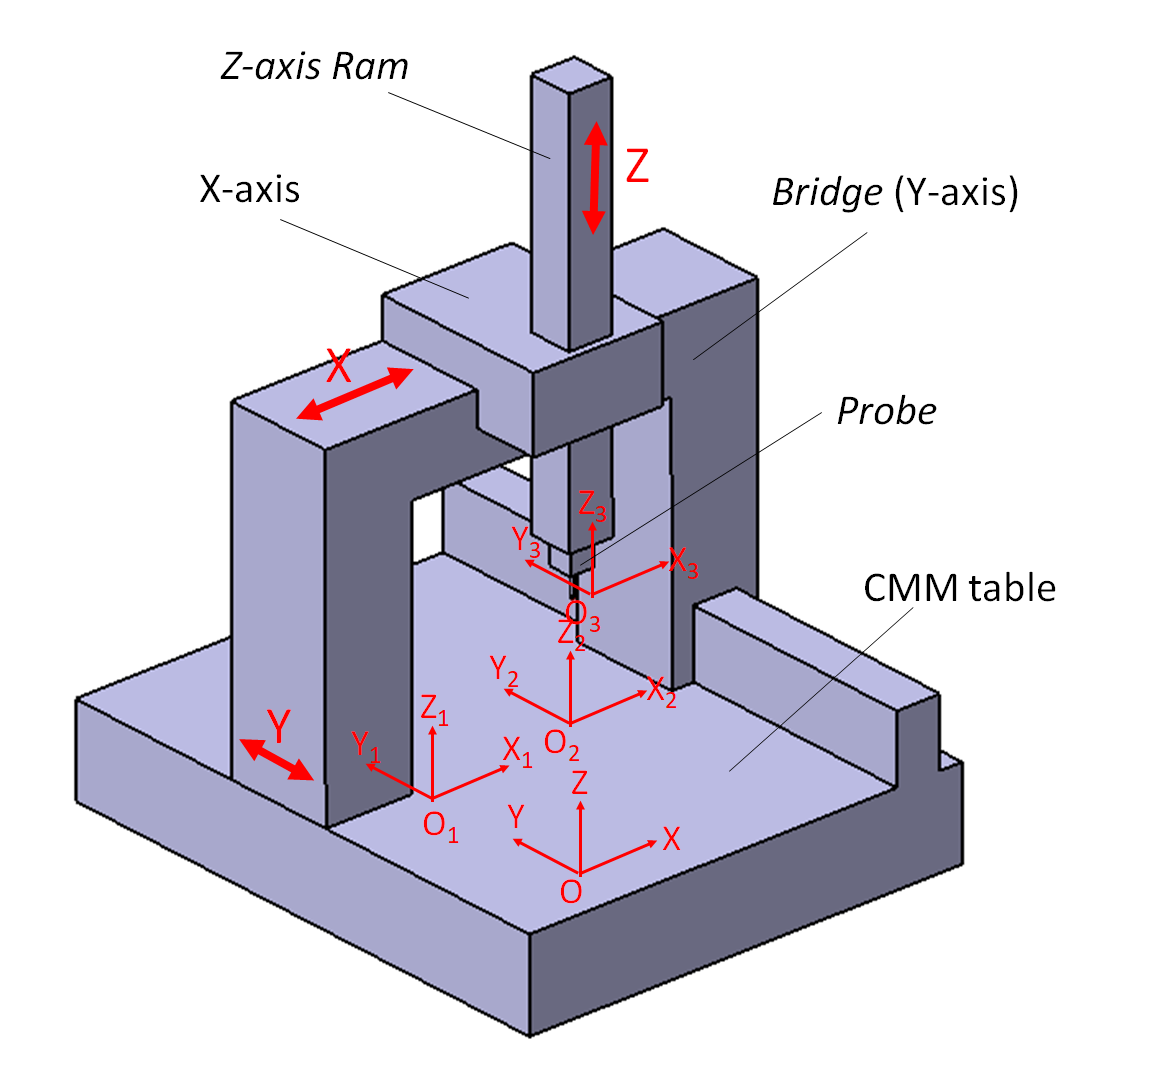 Error compensation for coordinate measuring instrument: The mathematical model of 3-axis coordinate measuring machine (CMM)